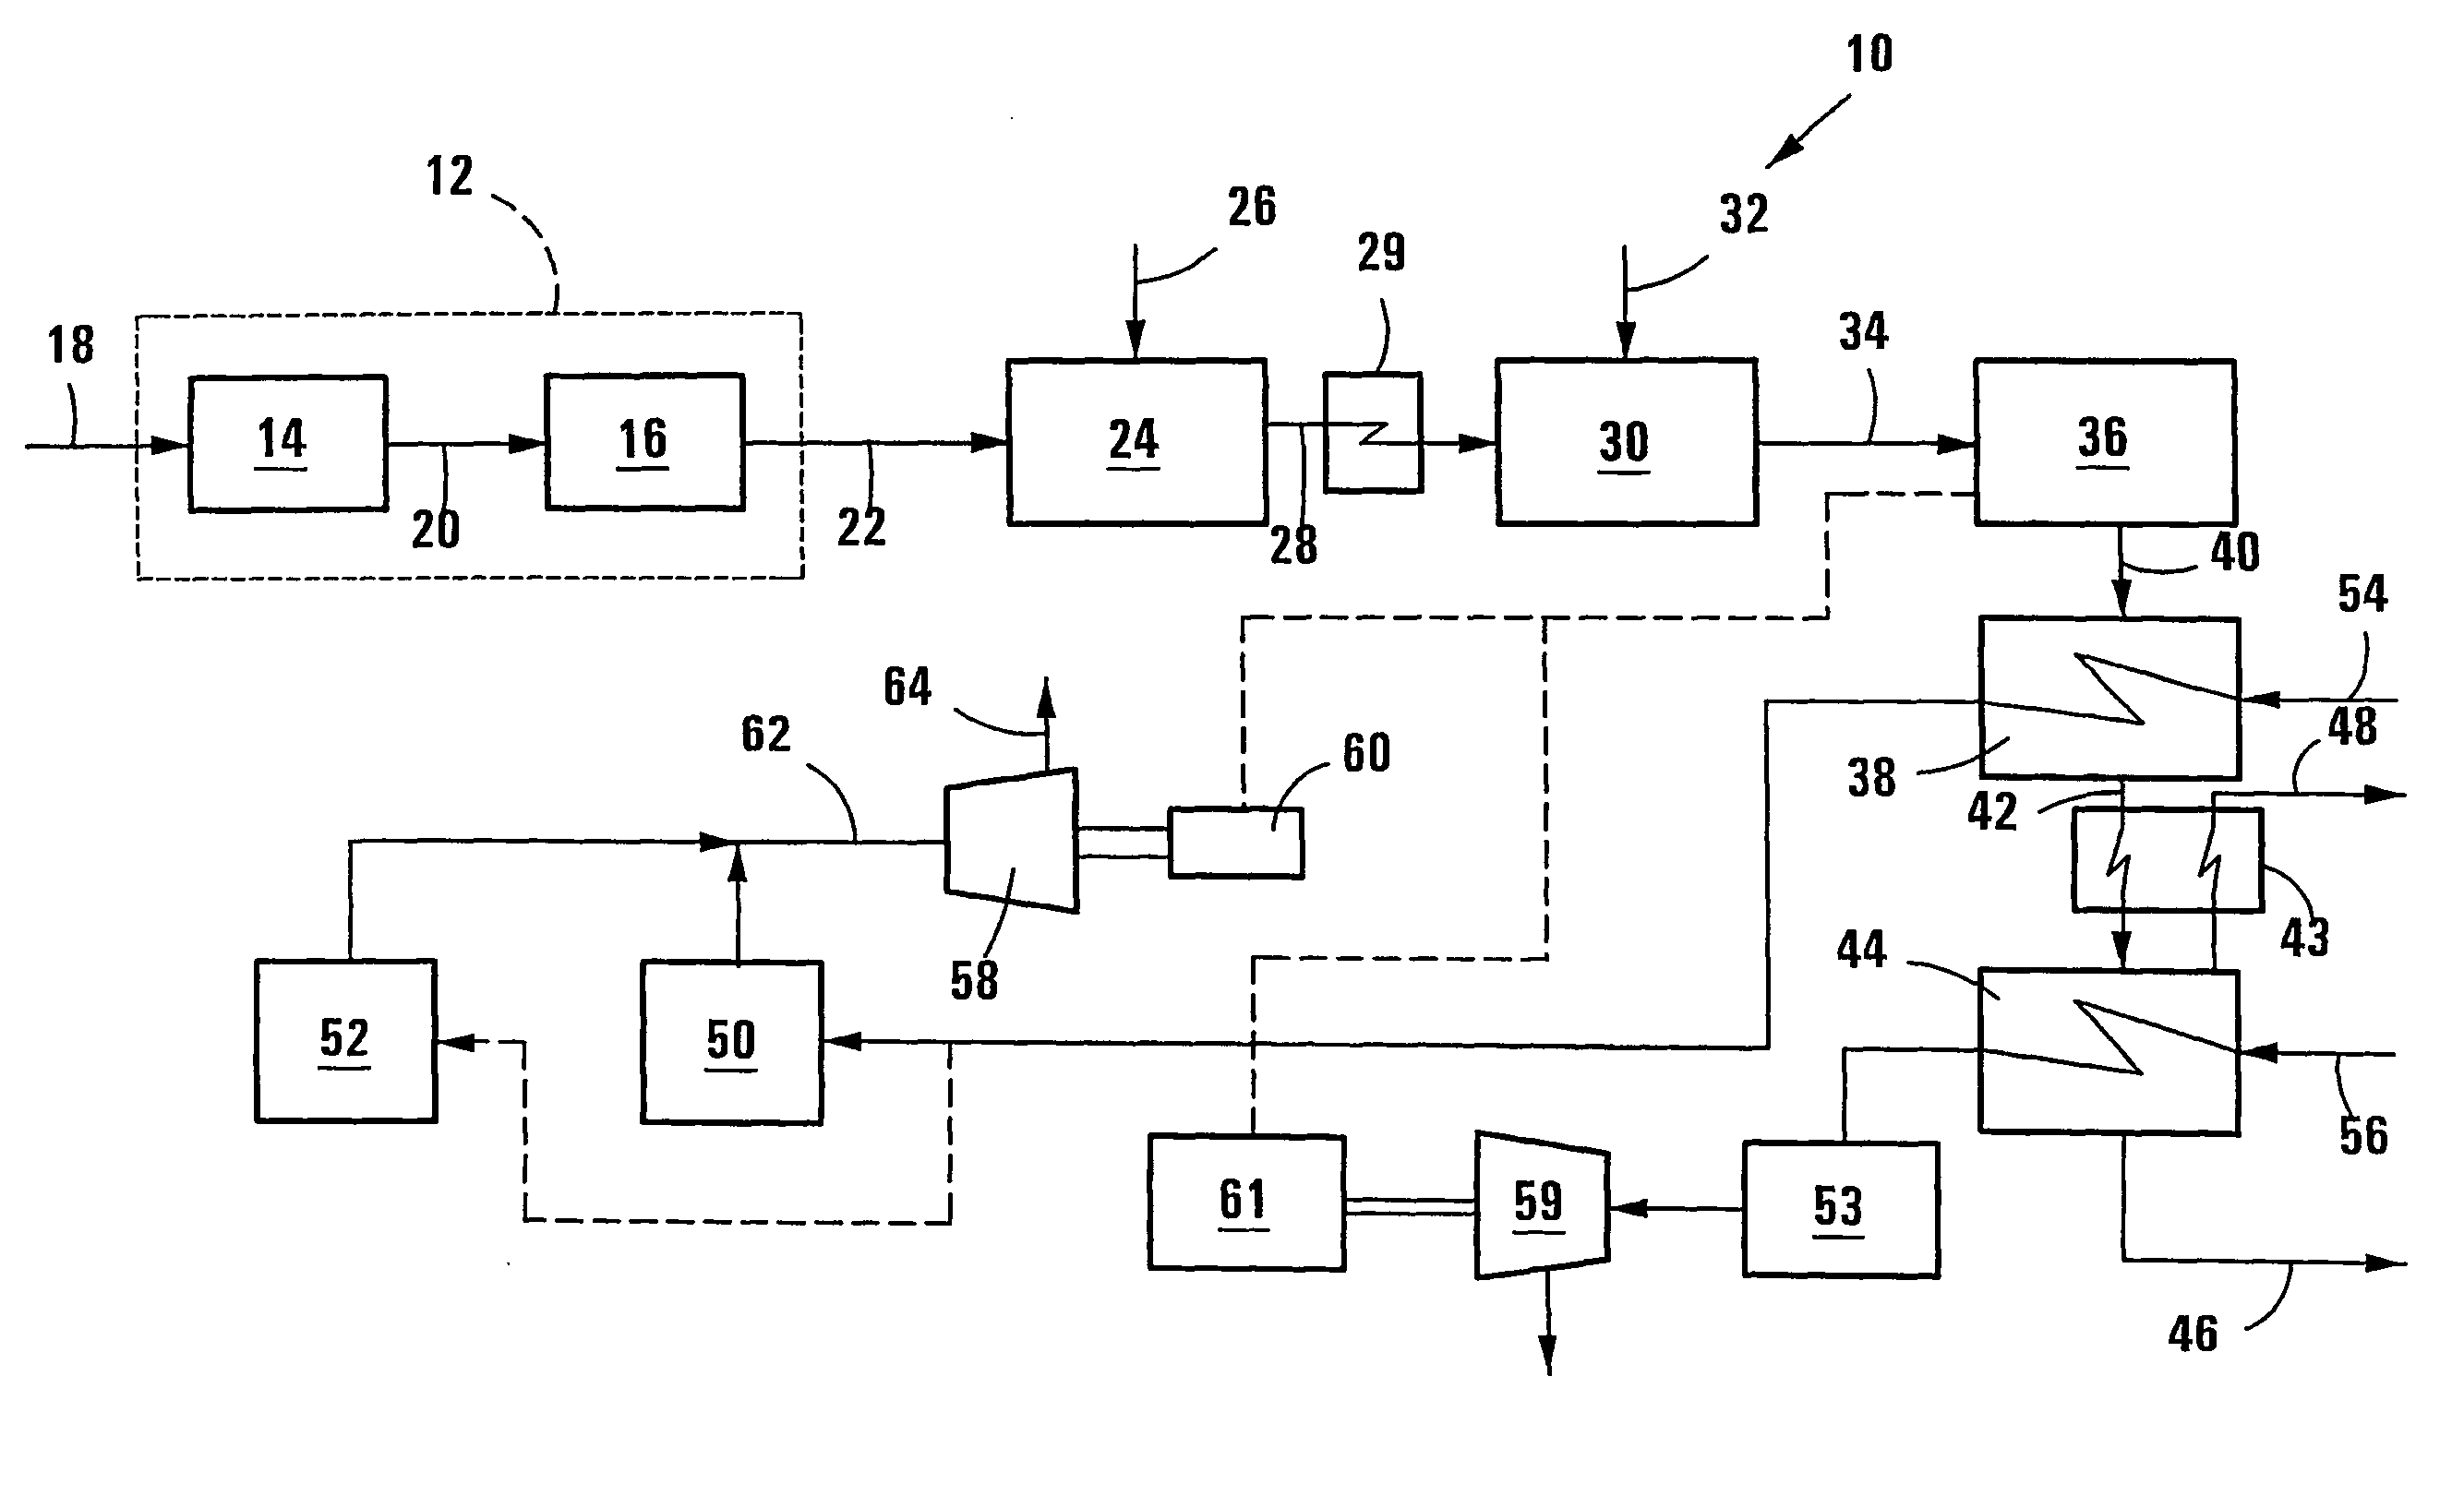 Production of synthesis gas and synthesis gas derived products